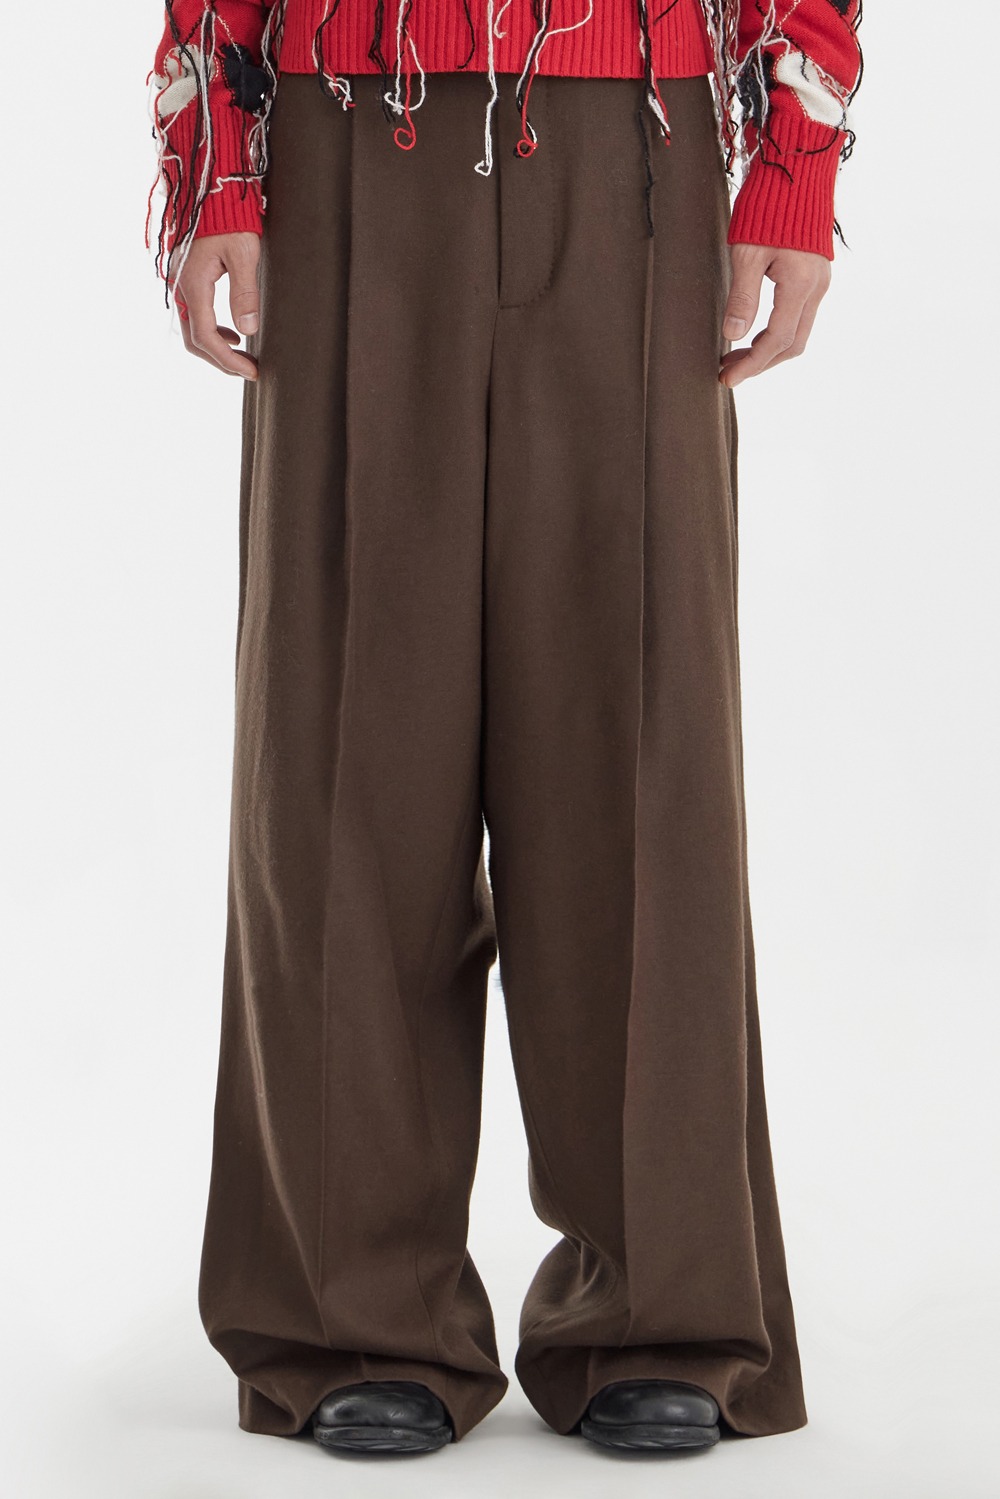 Flare Leg Trousers - Chocolate Brown